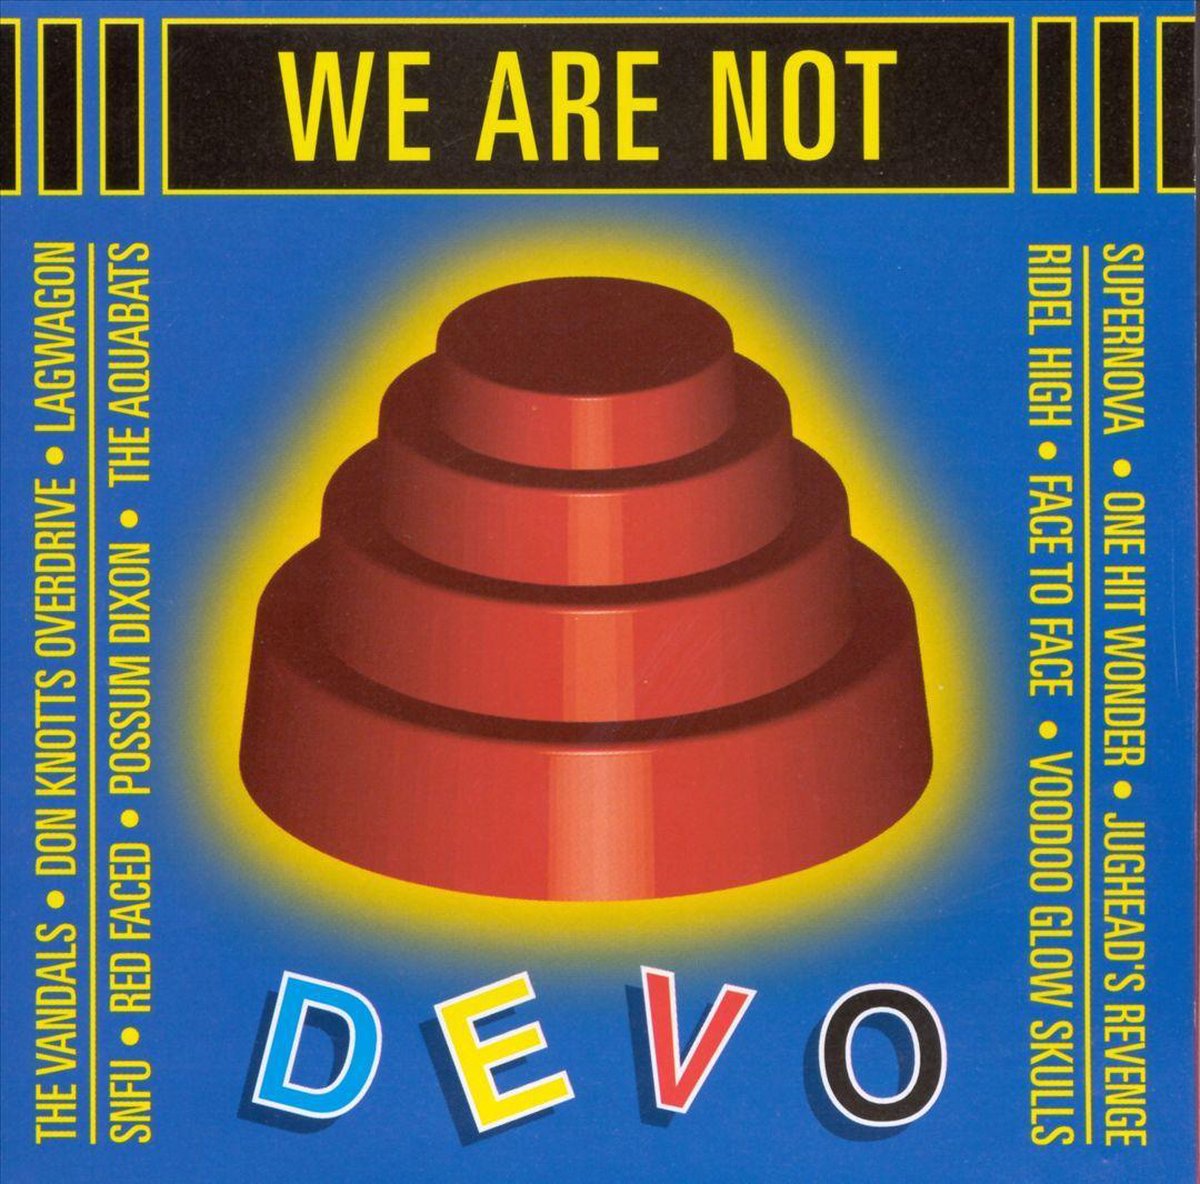 We Are Not Devo - various artists